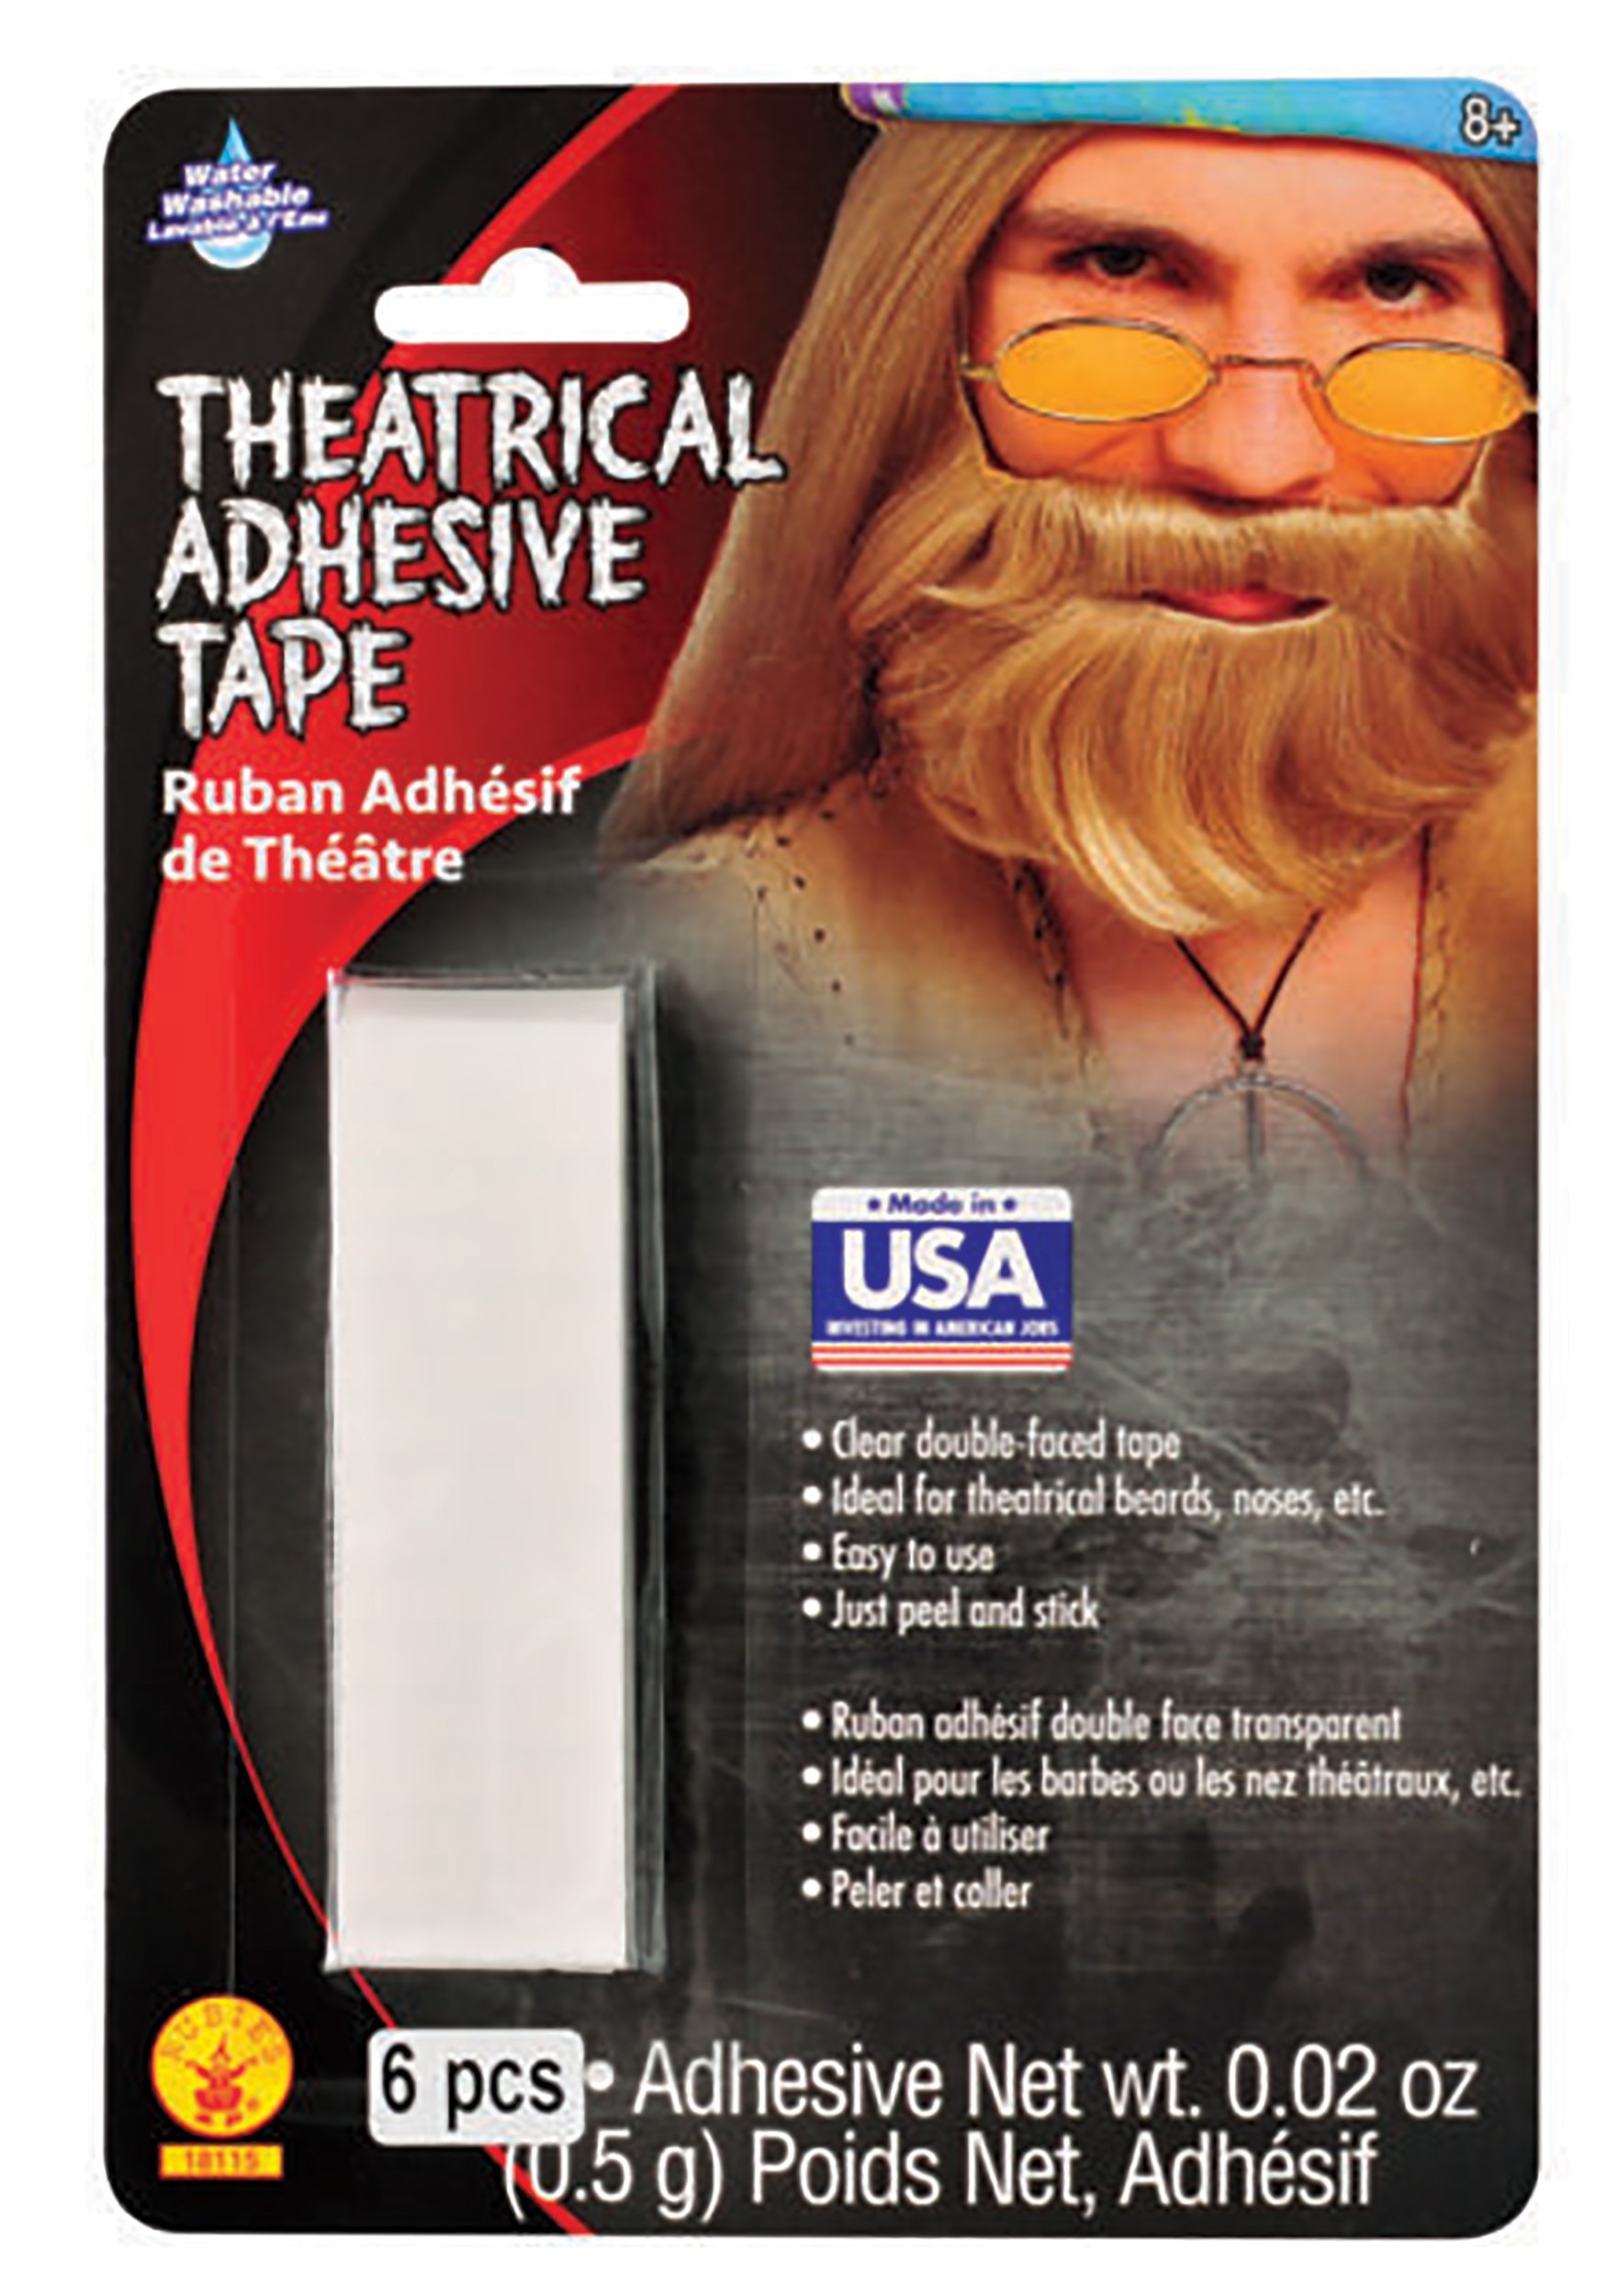 Mouth Taping with a Beard: The 5 Best Products that Stick - Mouth Tape Club